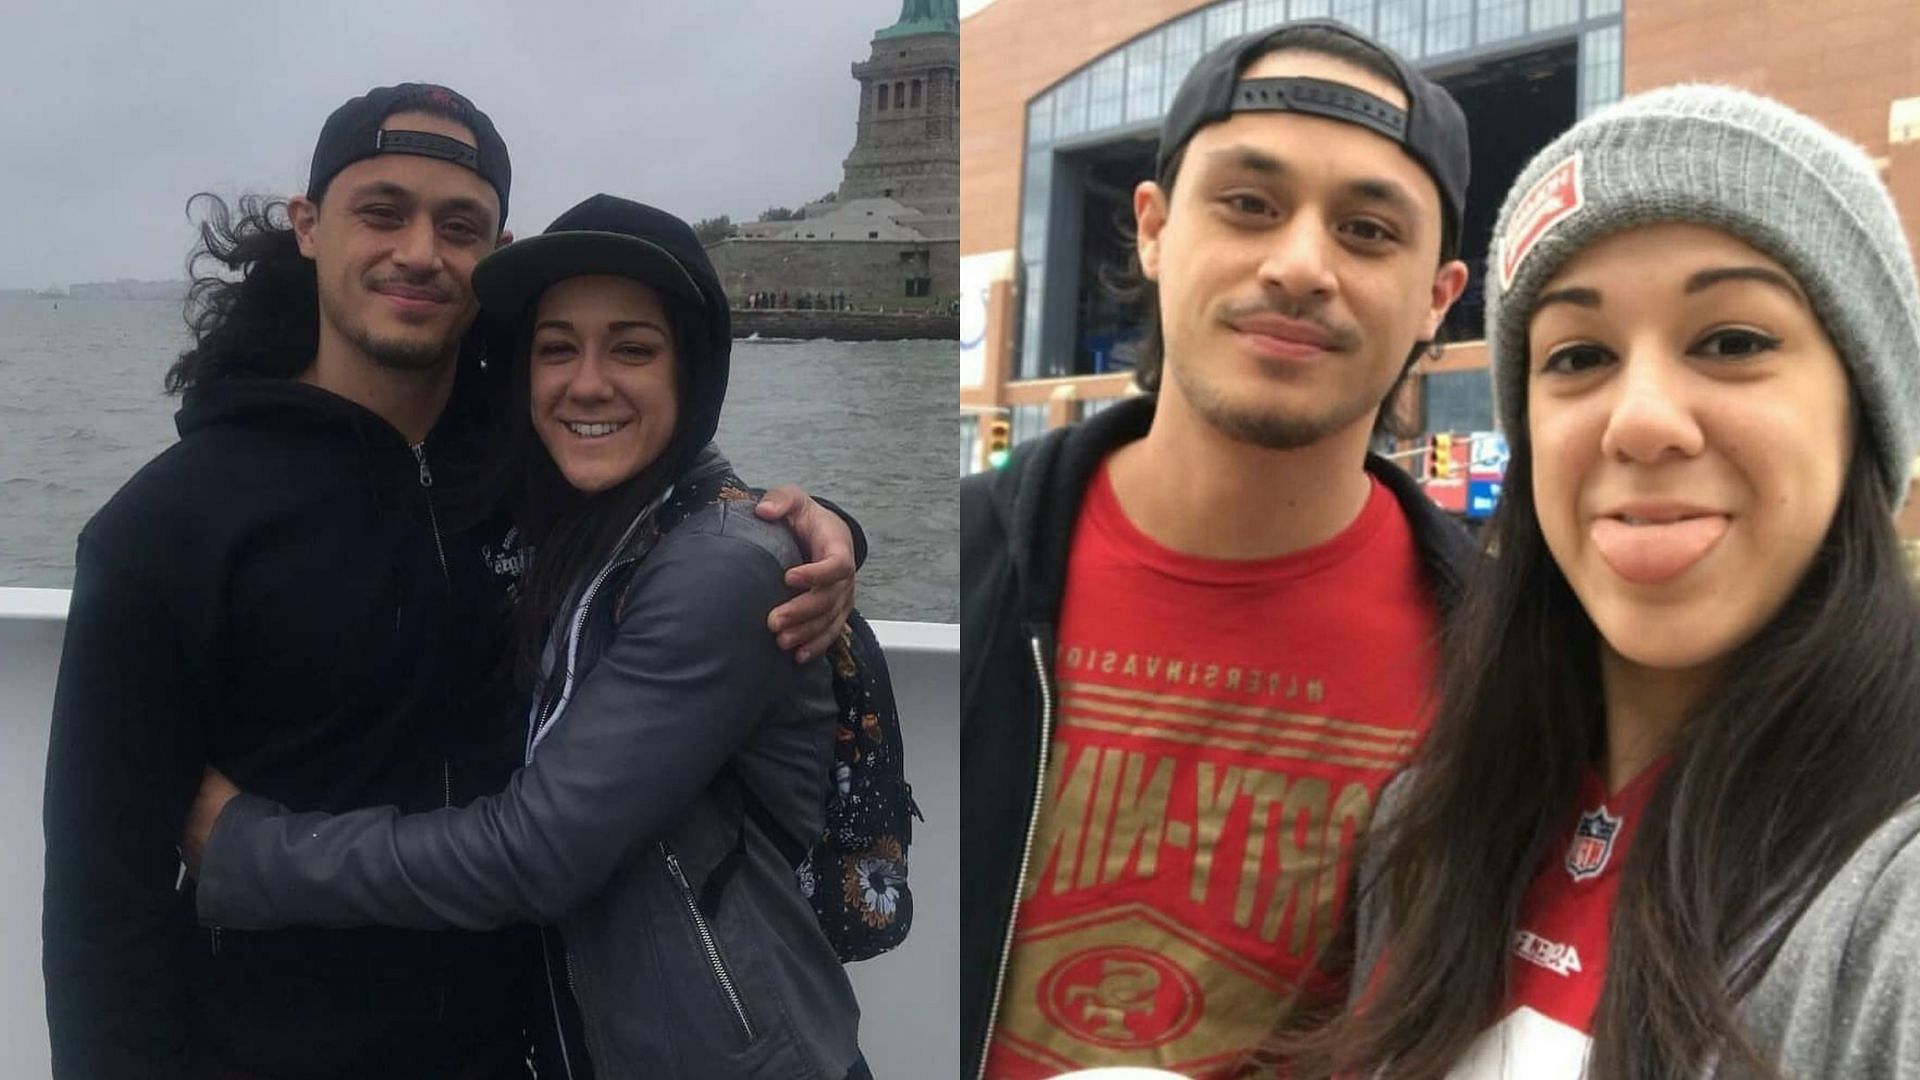 Bayley and Aaron Solow were engaged